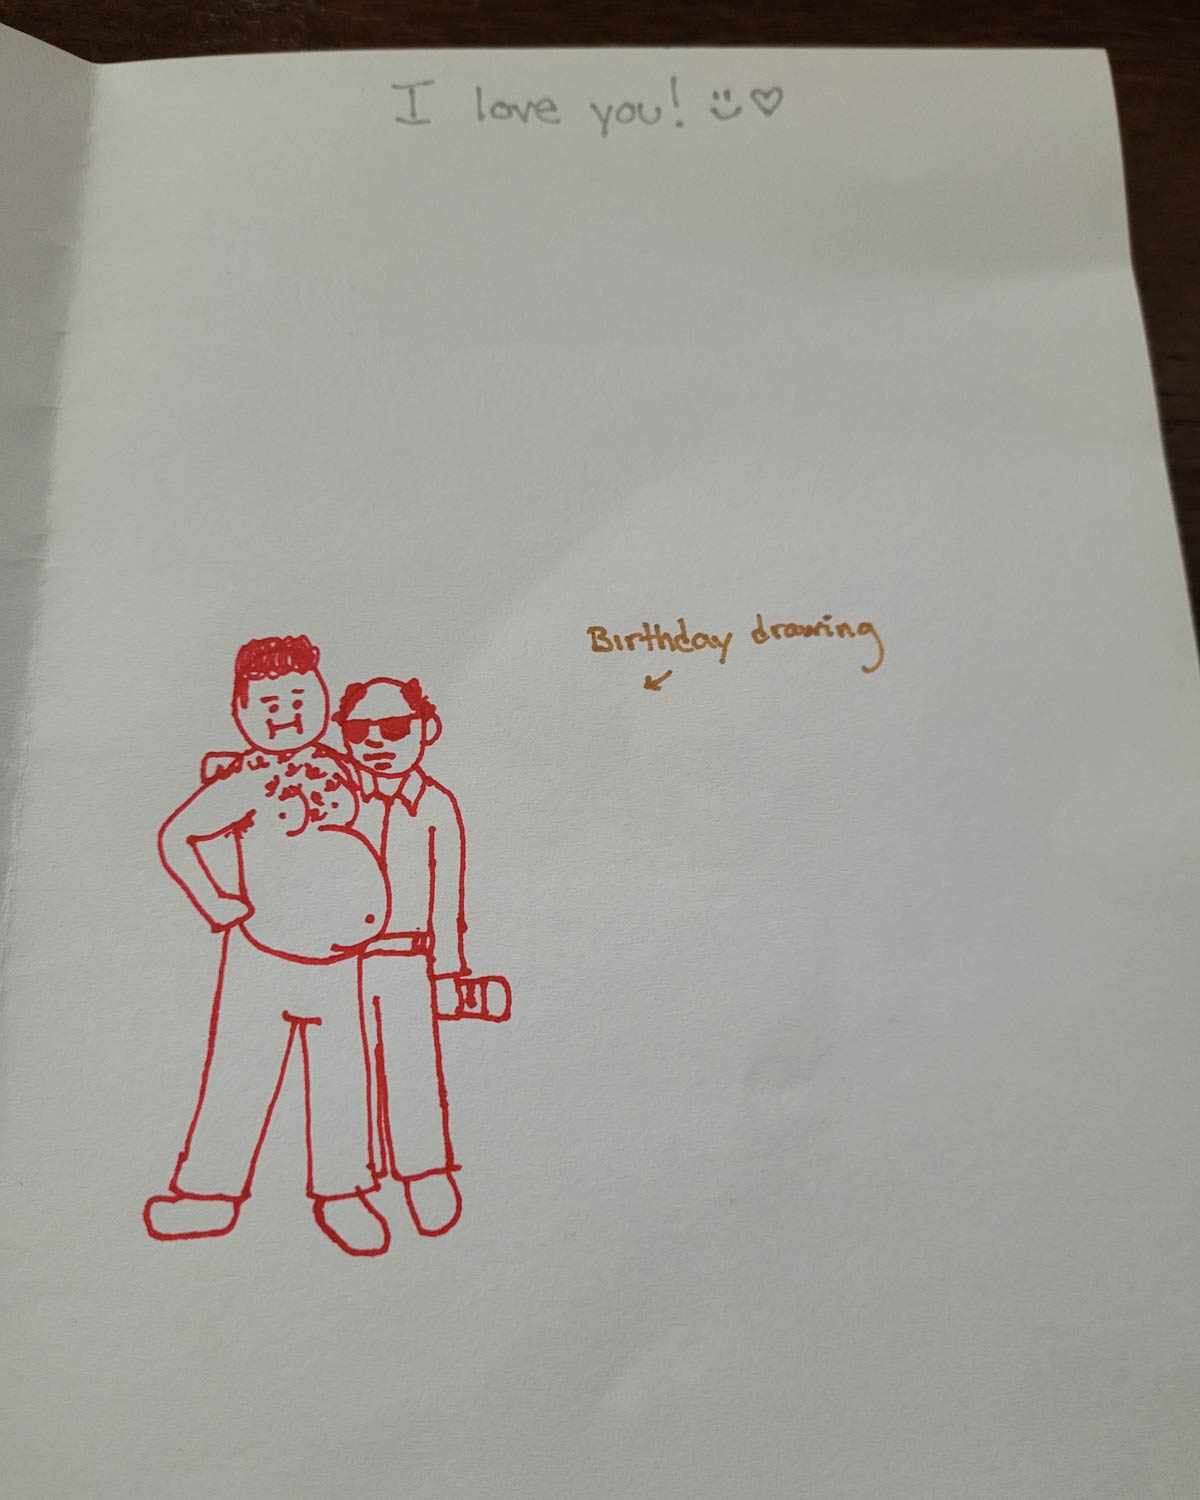 My daughter drew a birthday card for me